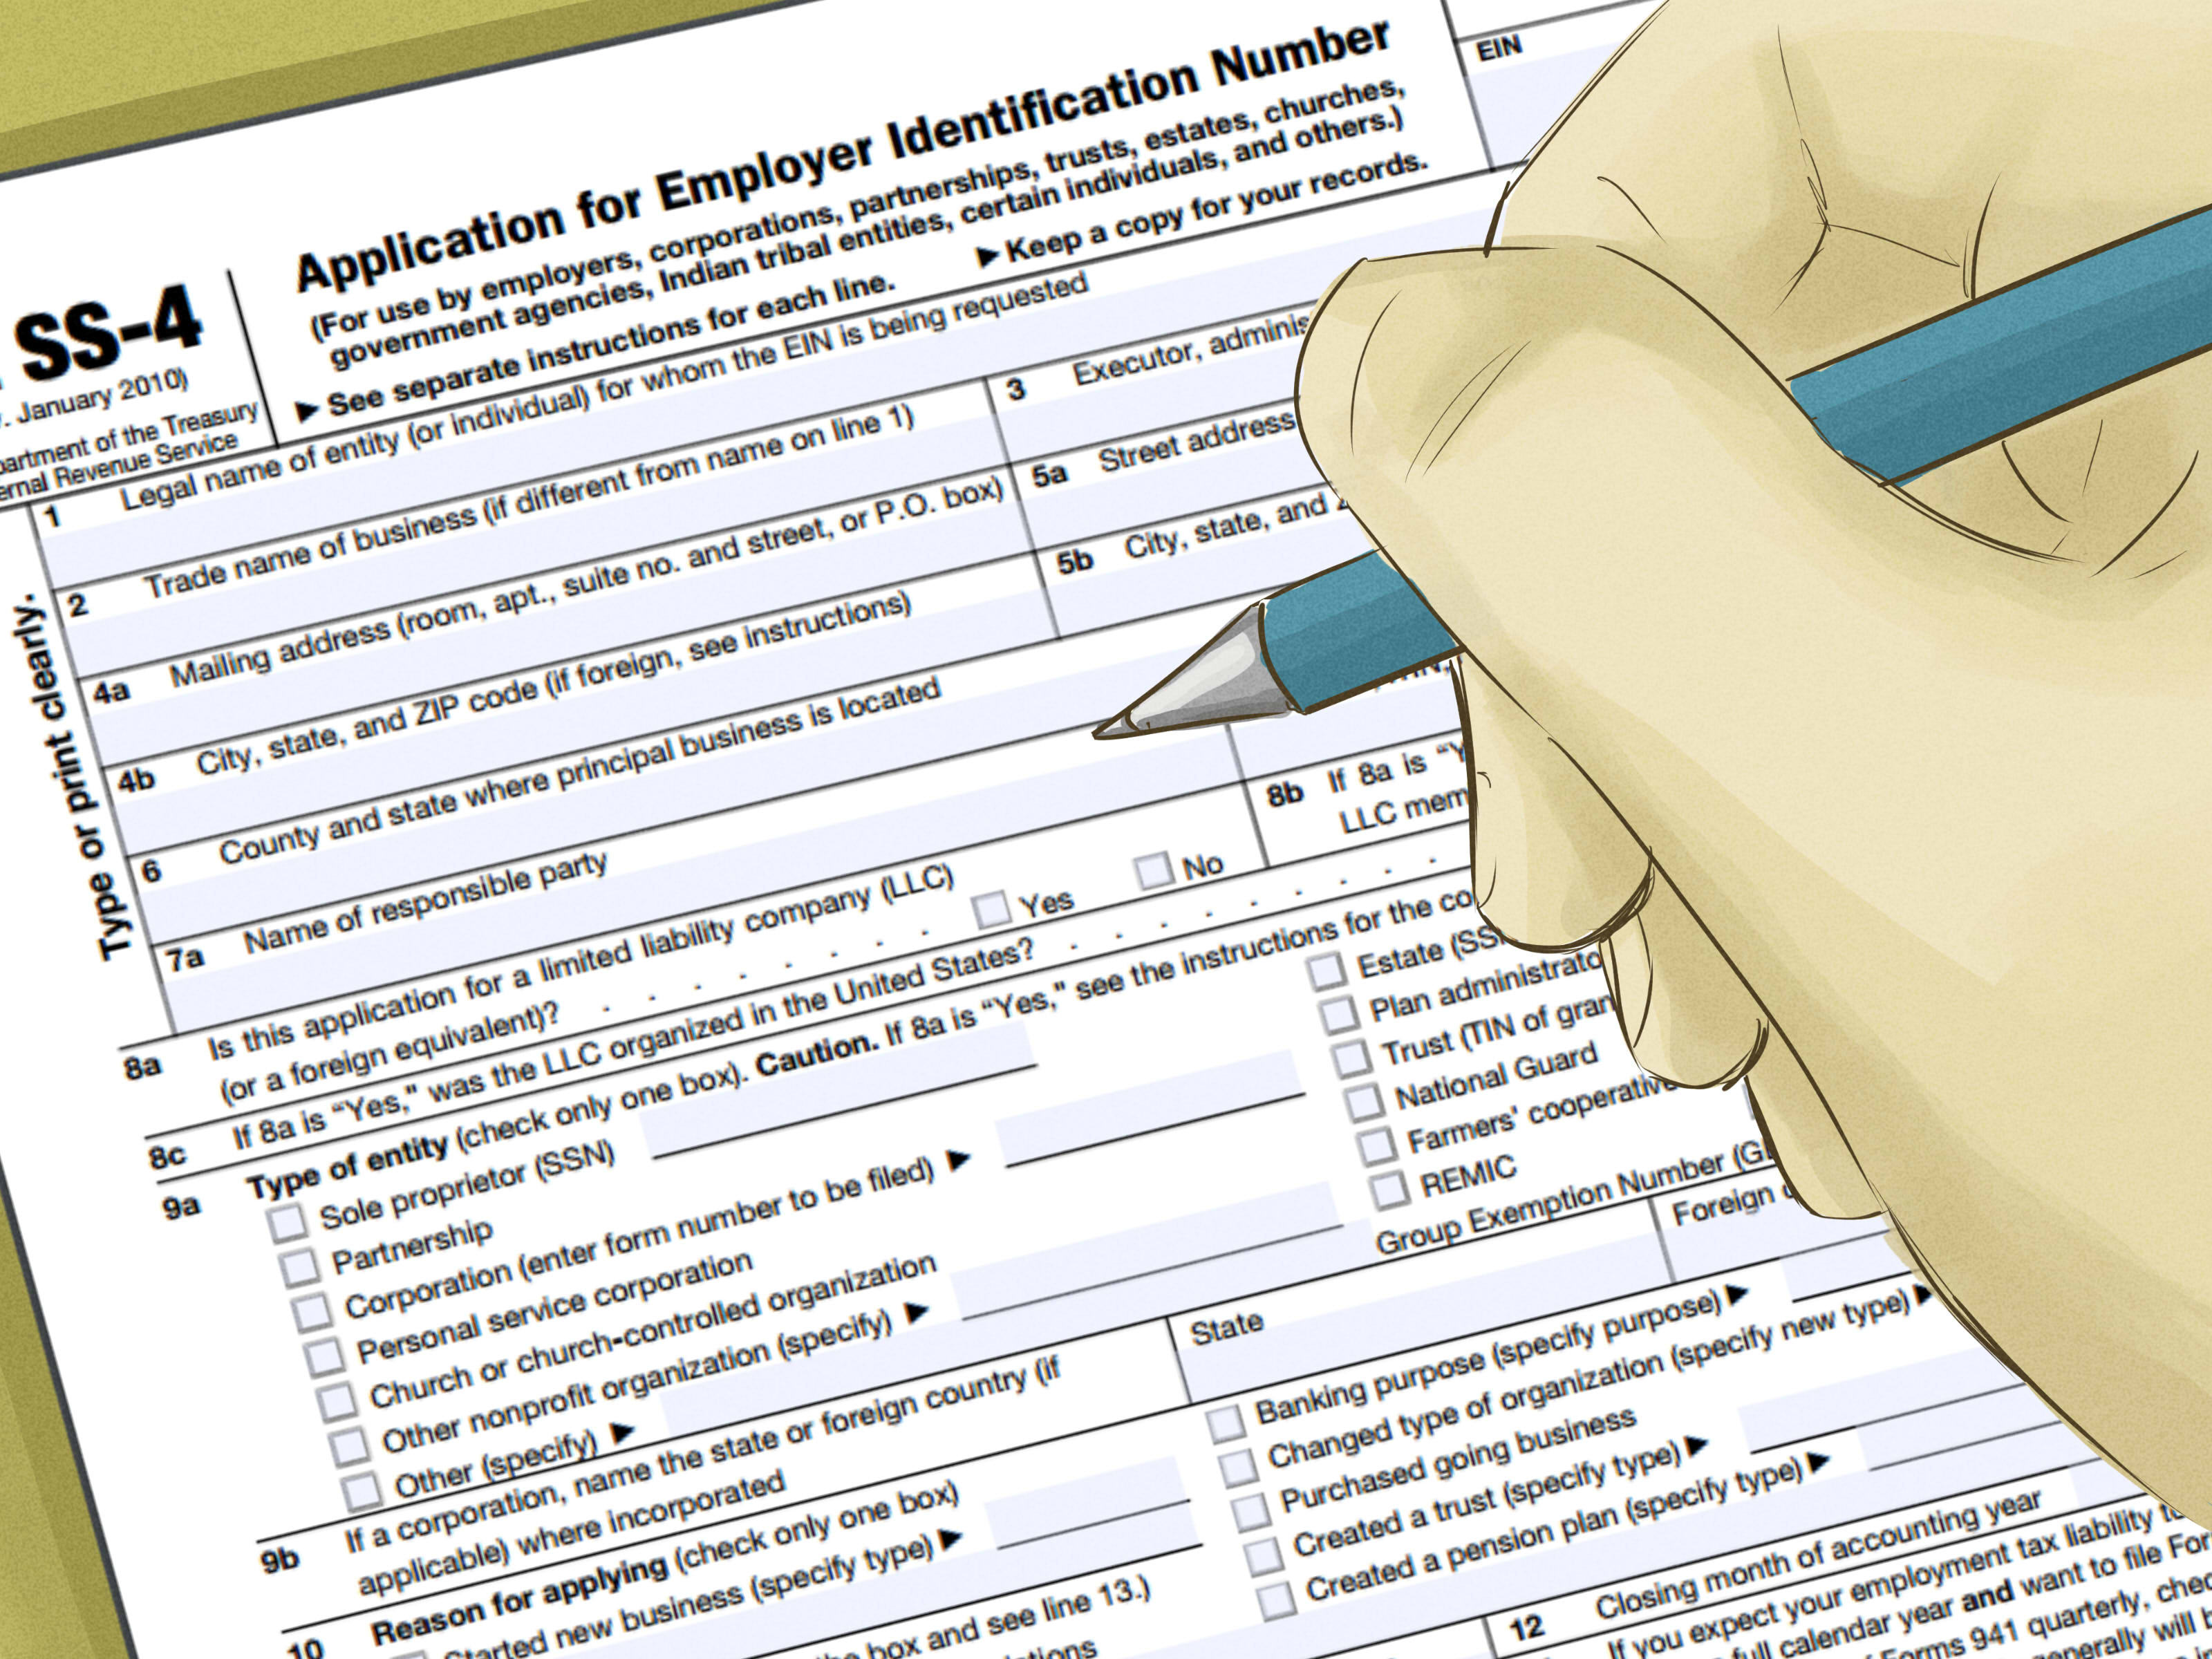 does-your-company-needs-a-federal-tax-id-number-tech-update